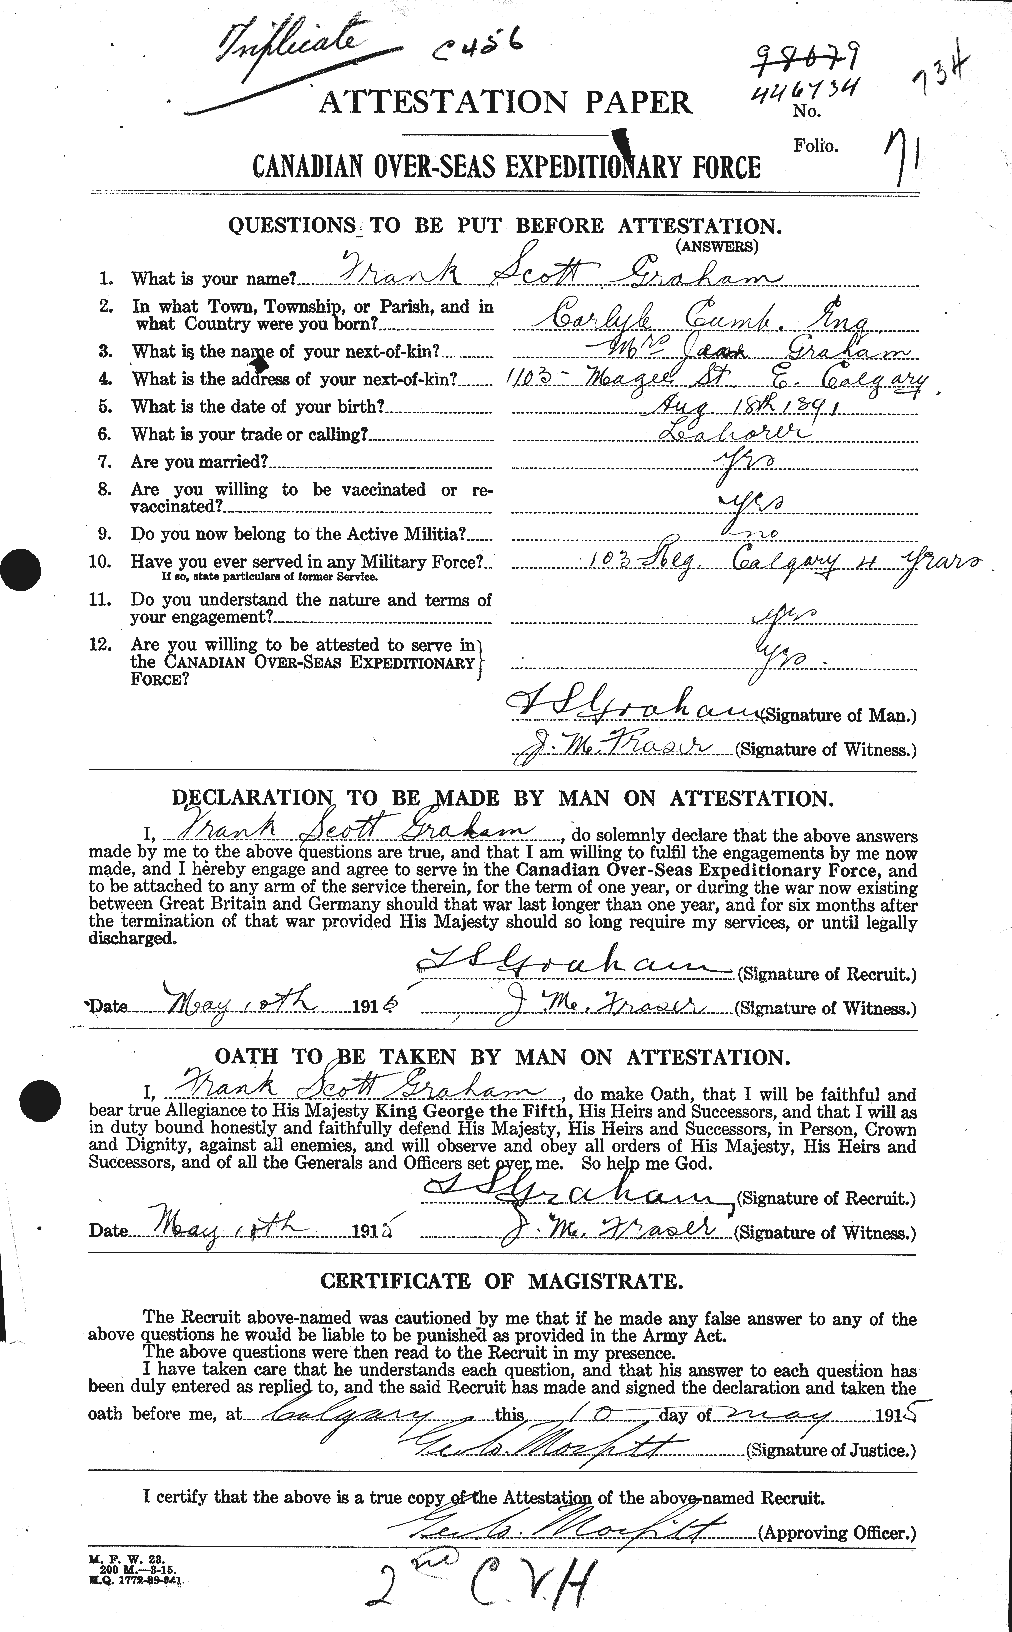 Personnel Records of the First World War - CEF 357595a